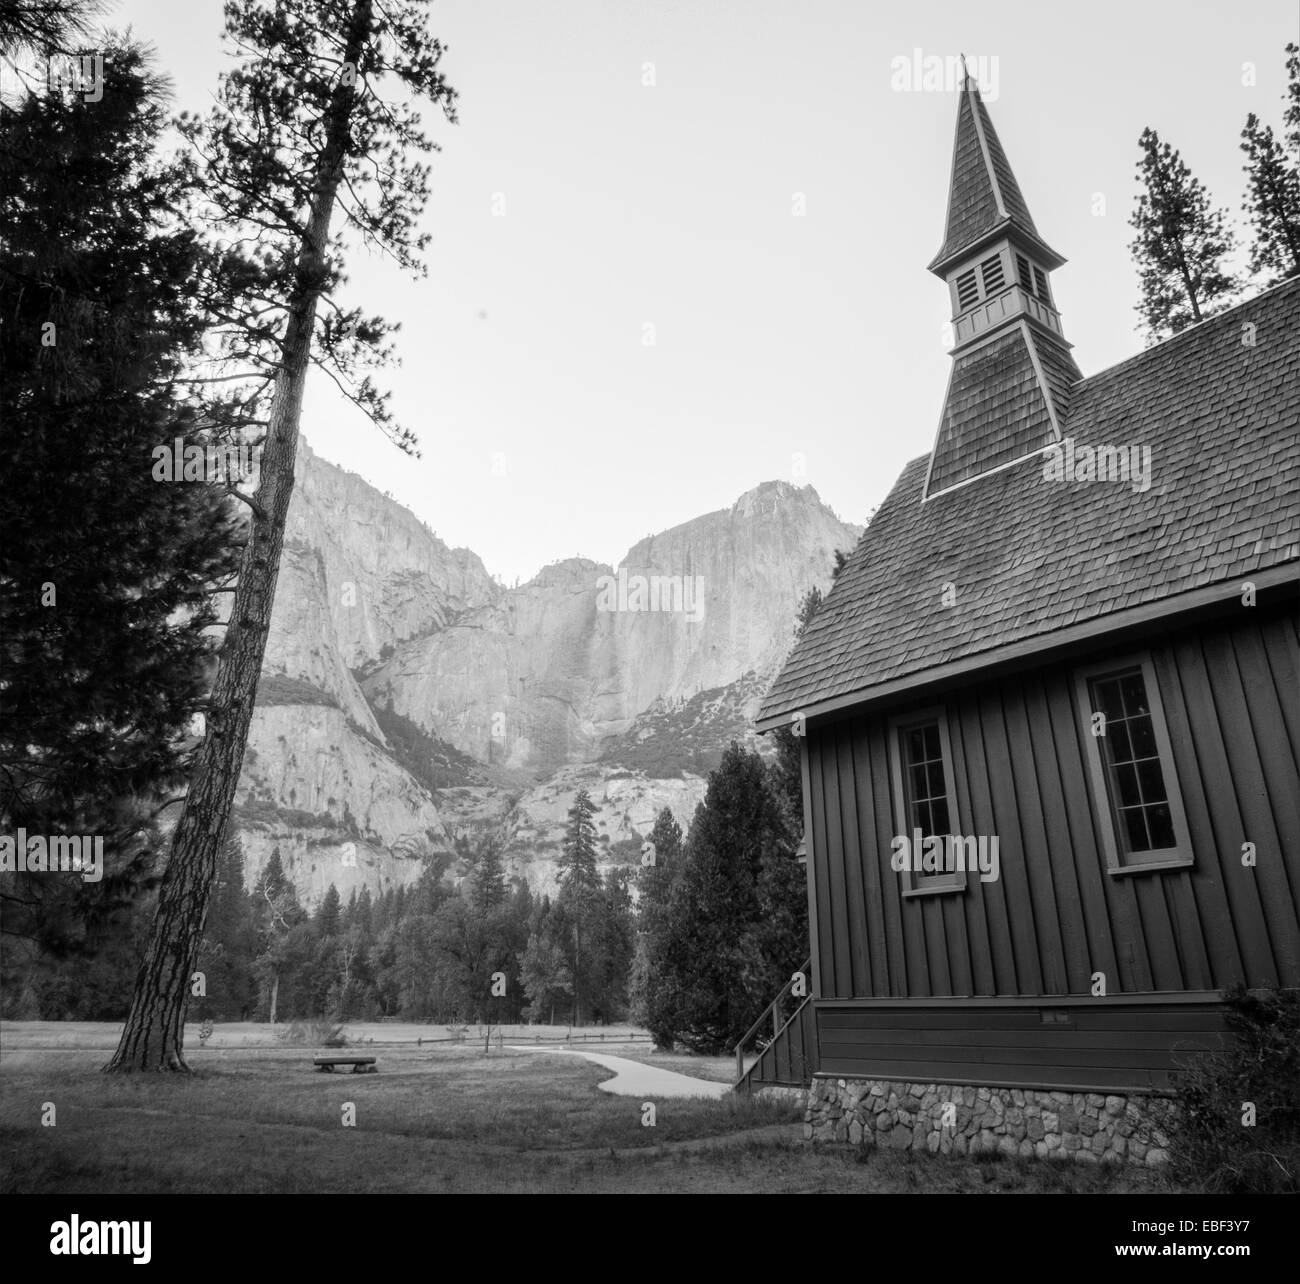 The Chapel in Yosemite Valley with Yosemite Falls in the background Stock Photo